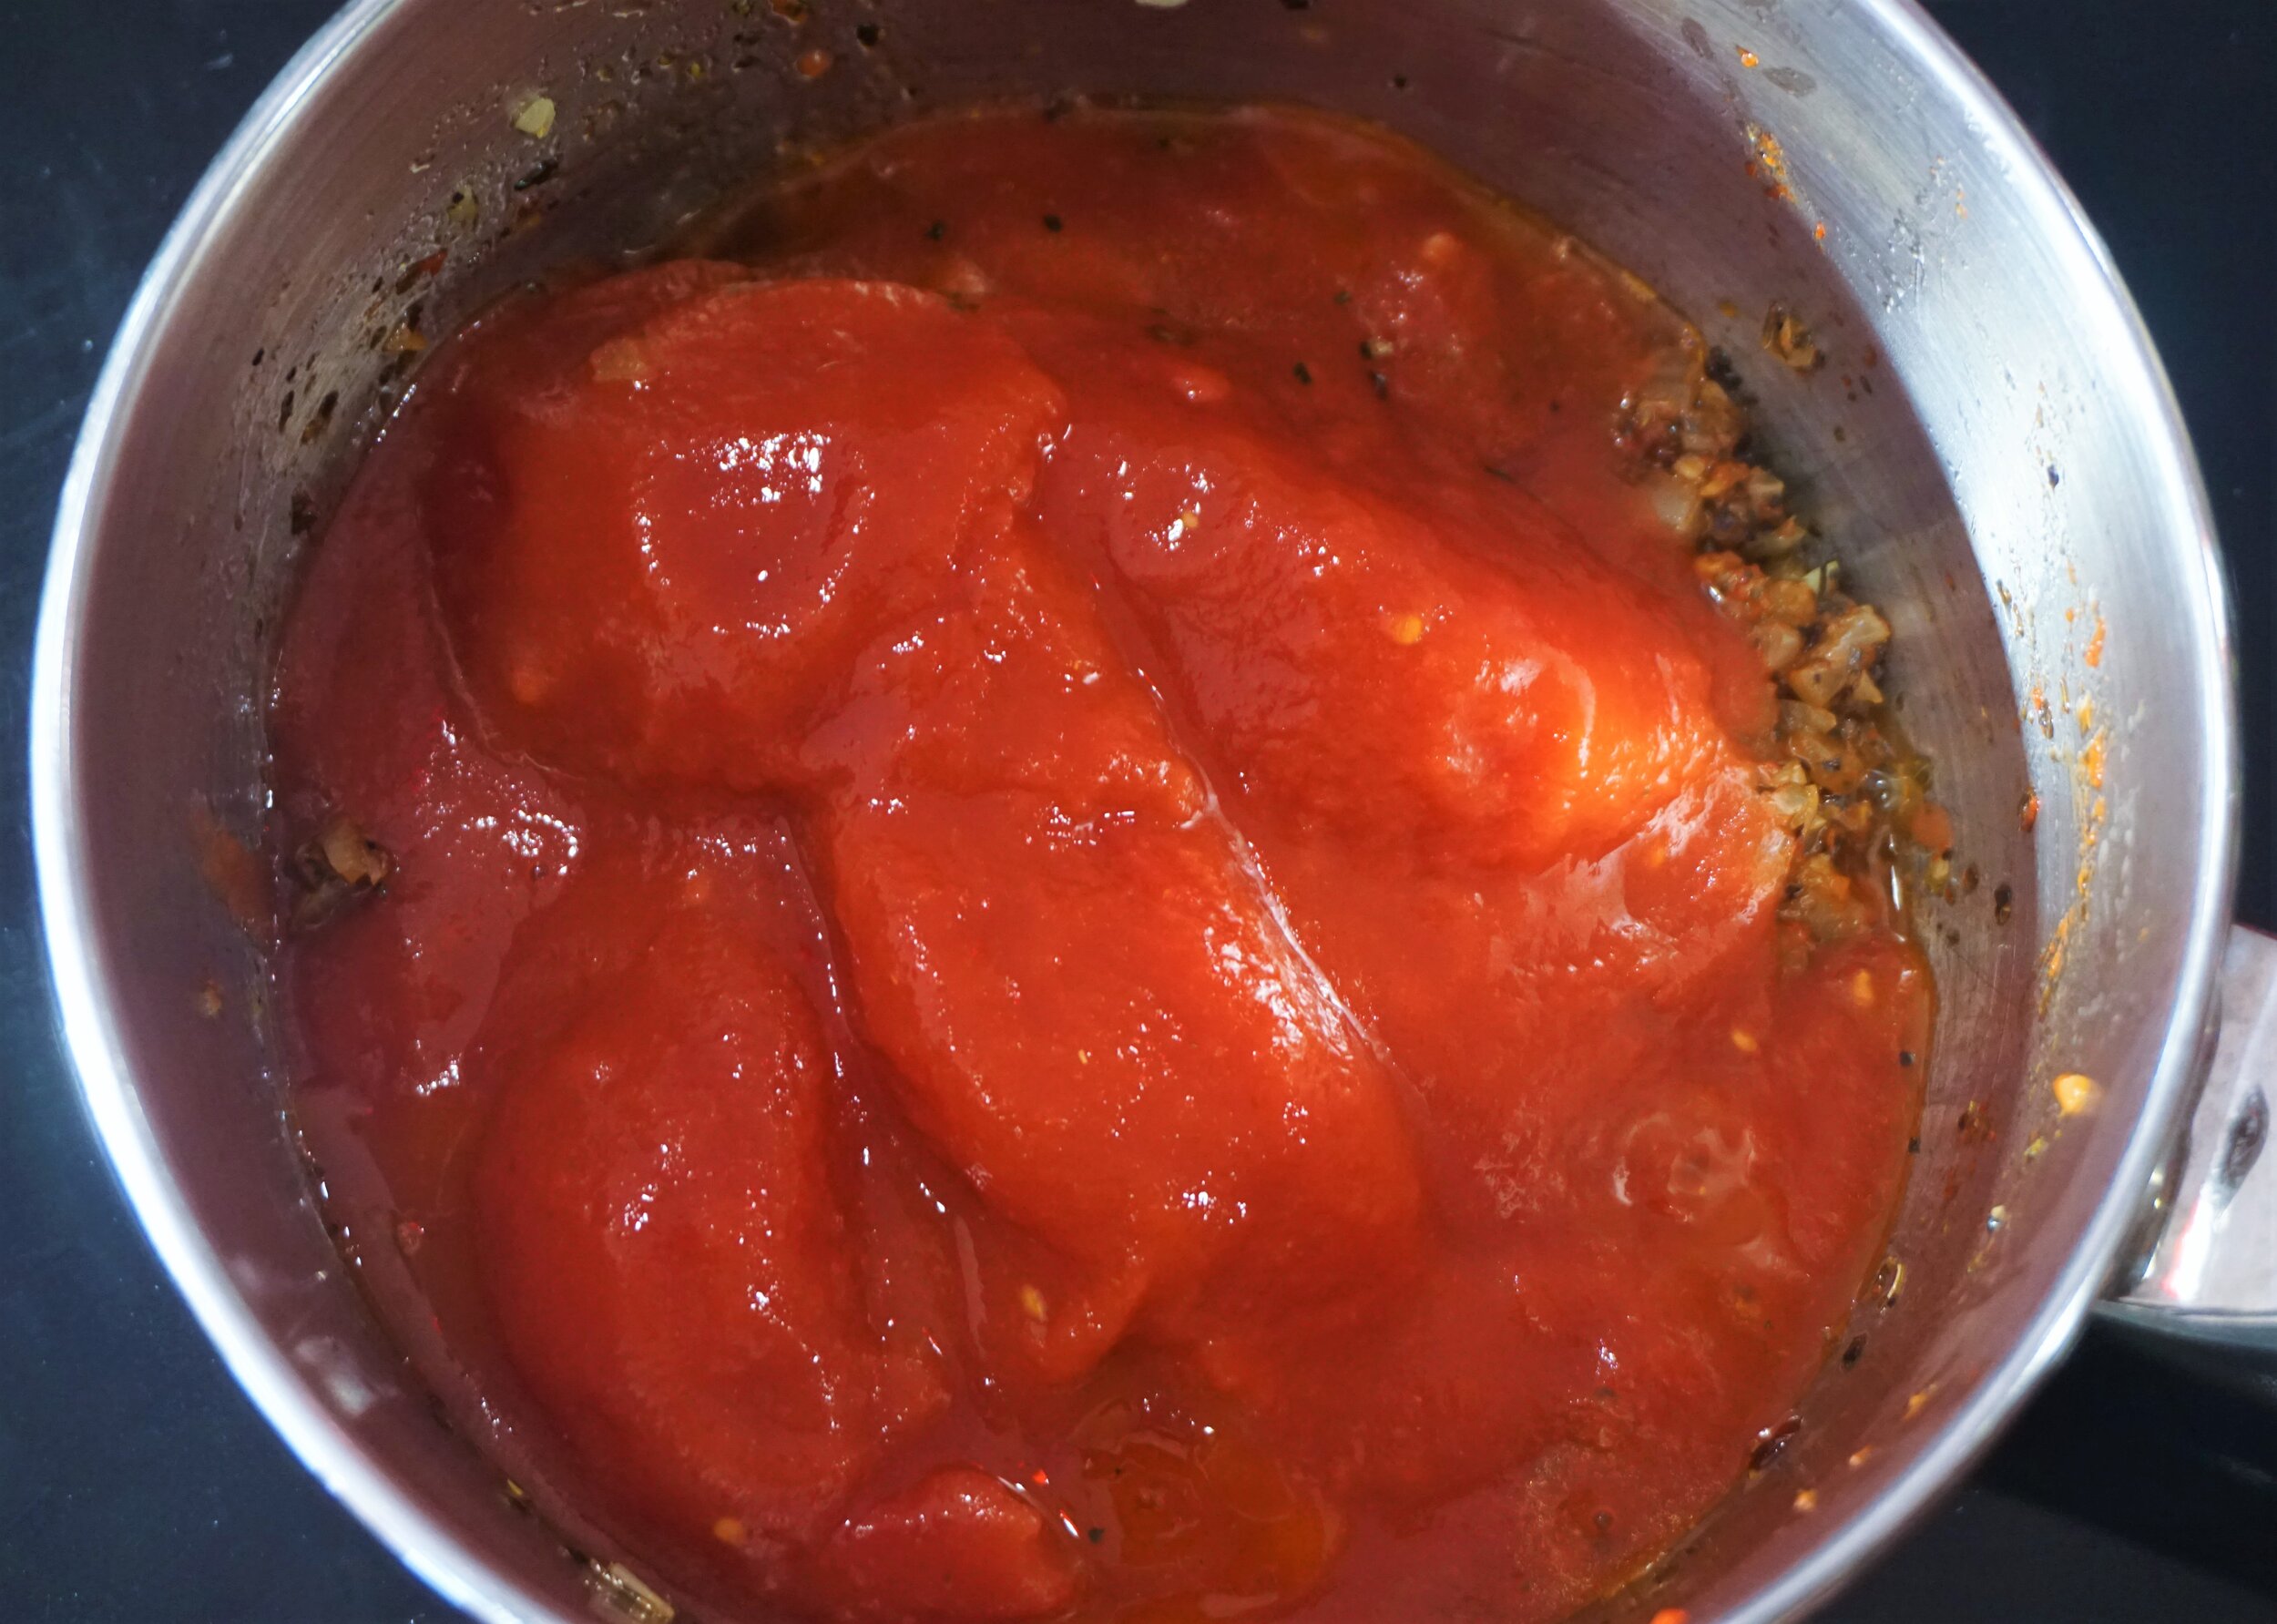 Add the whole tomatoes and gently mash into the rest of the sauce.